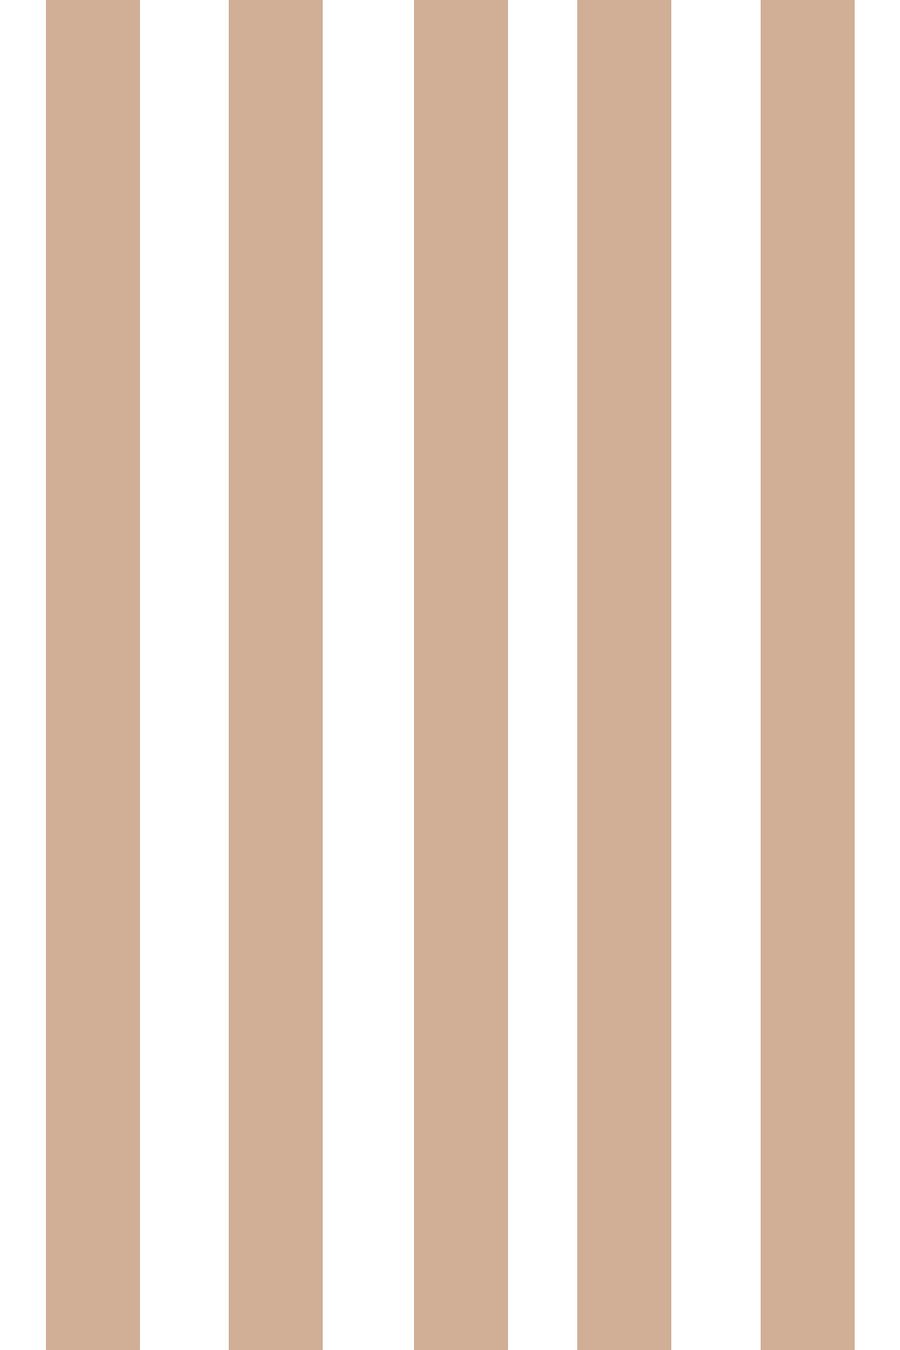 Woolf With Me Fitted Crib Sheet Stripes color_hazelnut